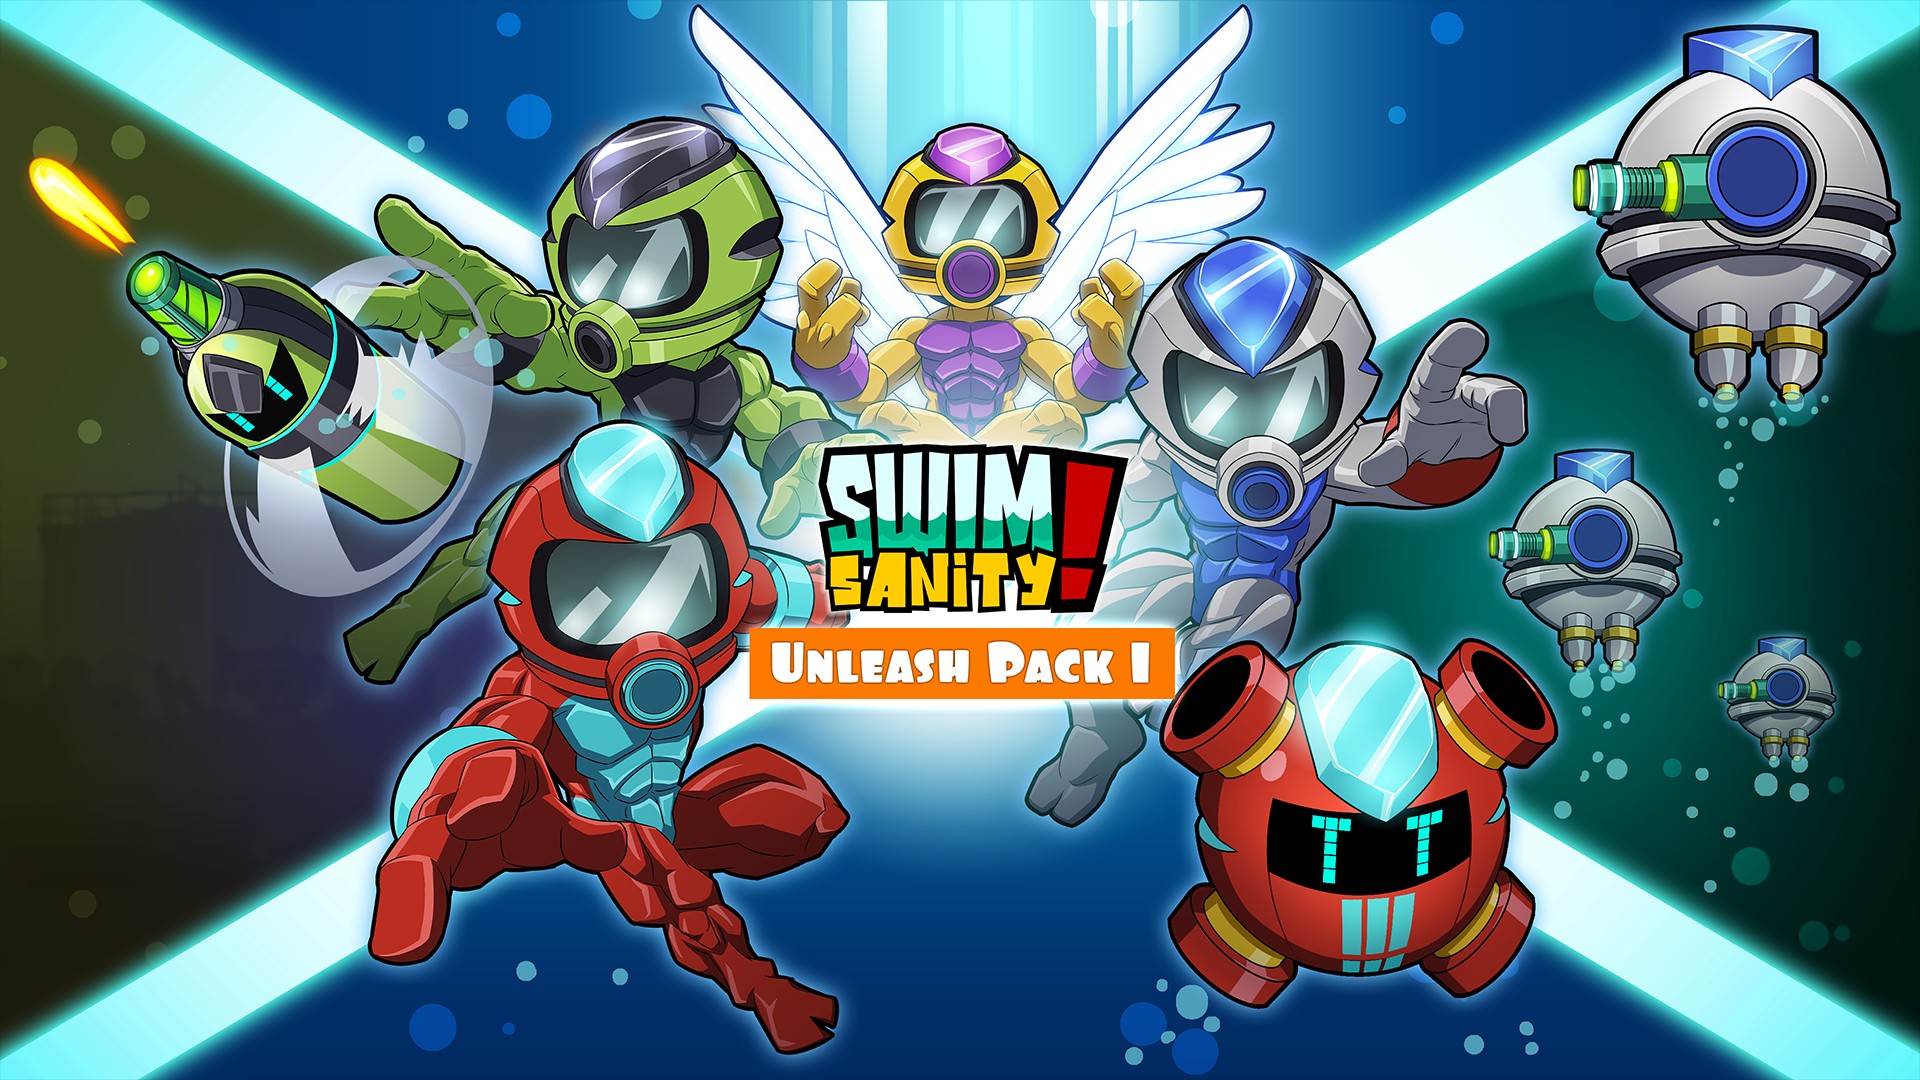 Swimsanity Unleash Pack 1 Dlc Is Available Today On Xbox One Xbox Wire